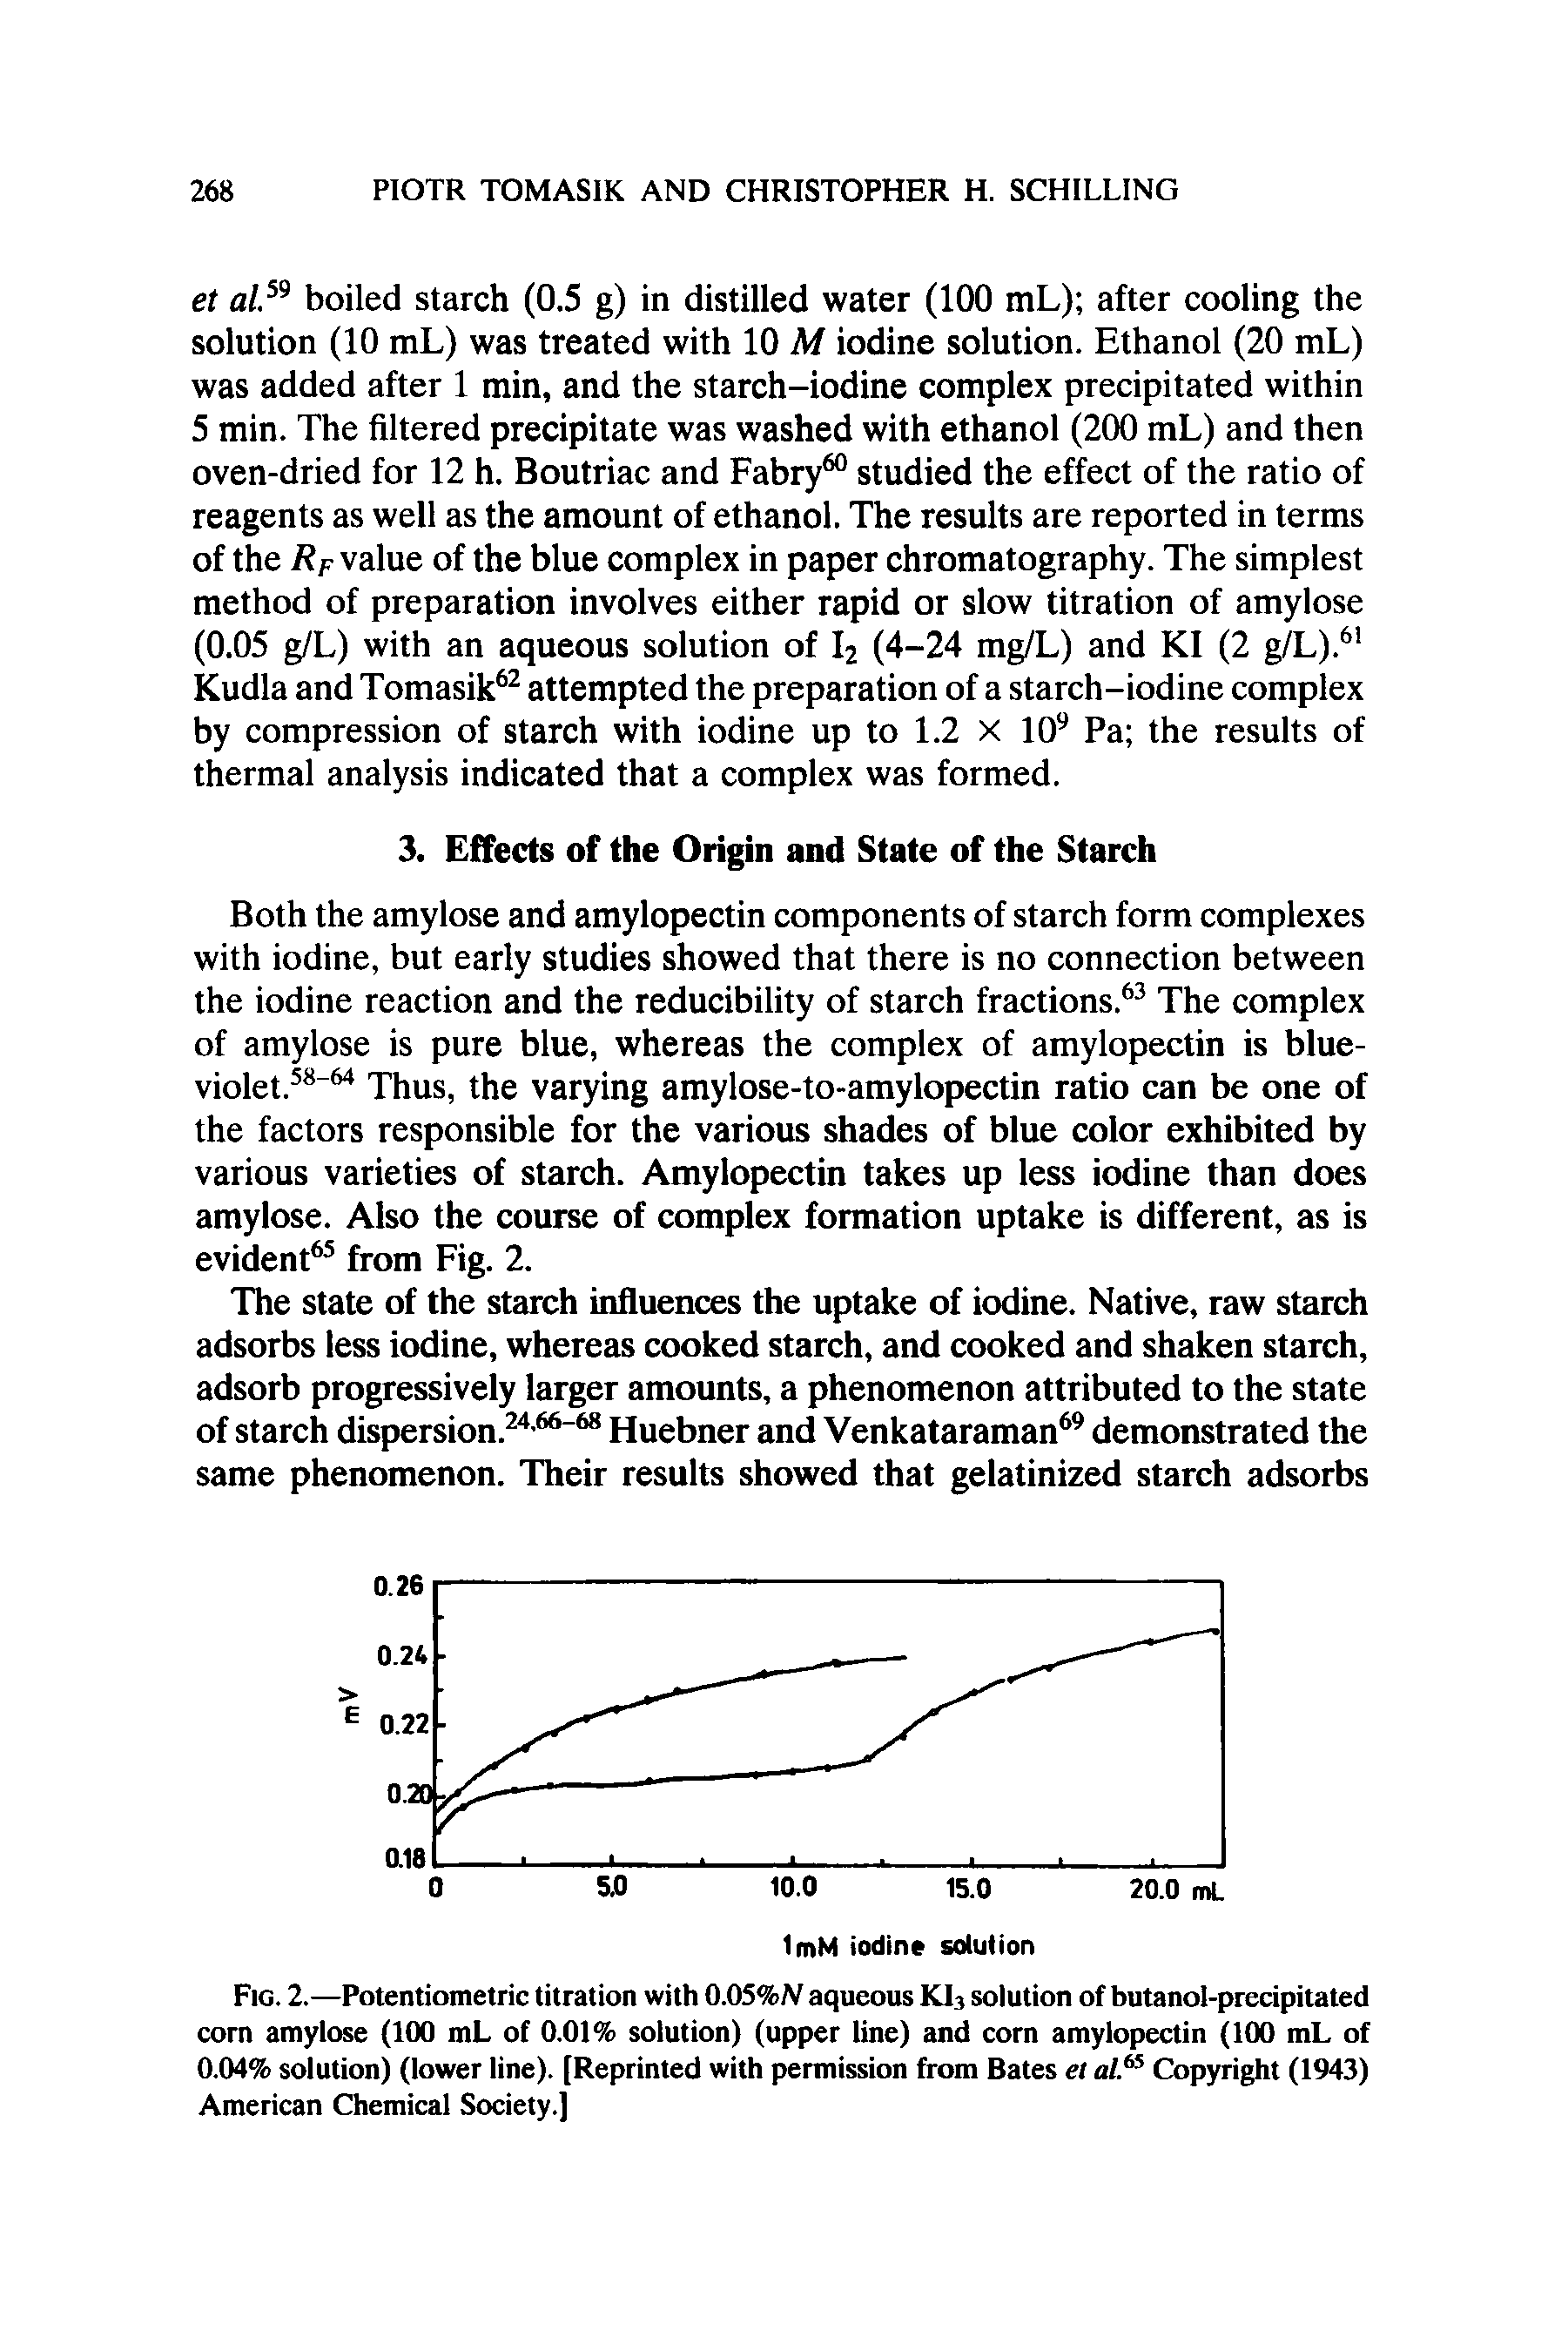 Fig. 2.—Potentiometric titration with 0.05%N aqueous KL solution of butanol-precipitated corn amylose (100 mL of 0.01% solution) (upper line) and corn amylopectin (100 mL of 0.04% solution) (lower line). [Reprinted with permission from Bates et al.65 Copyright (1943) American Chemical Society.]...